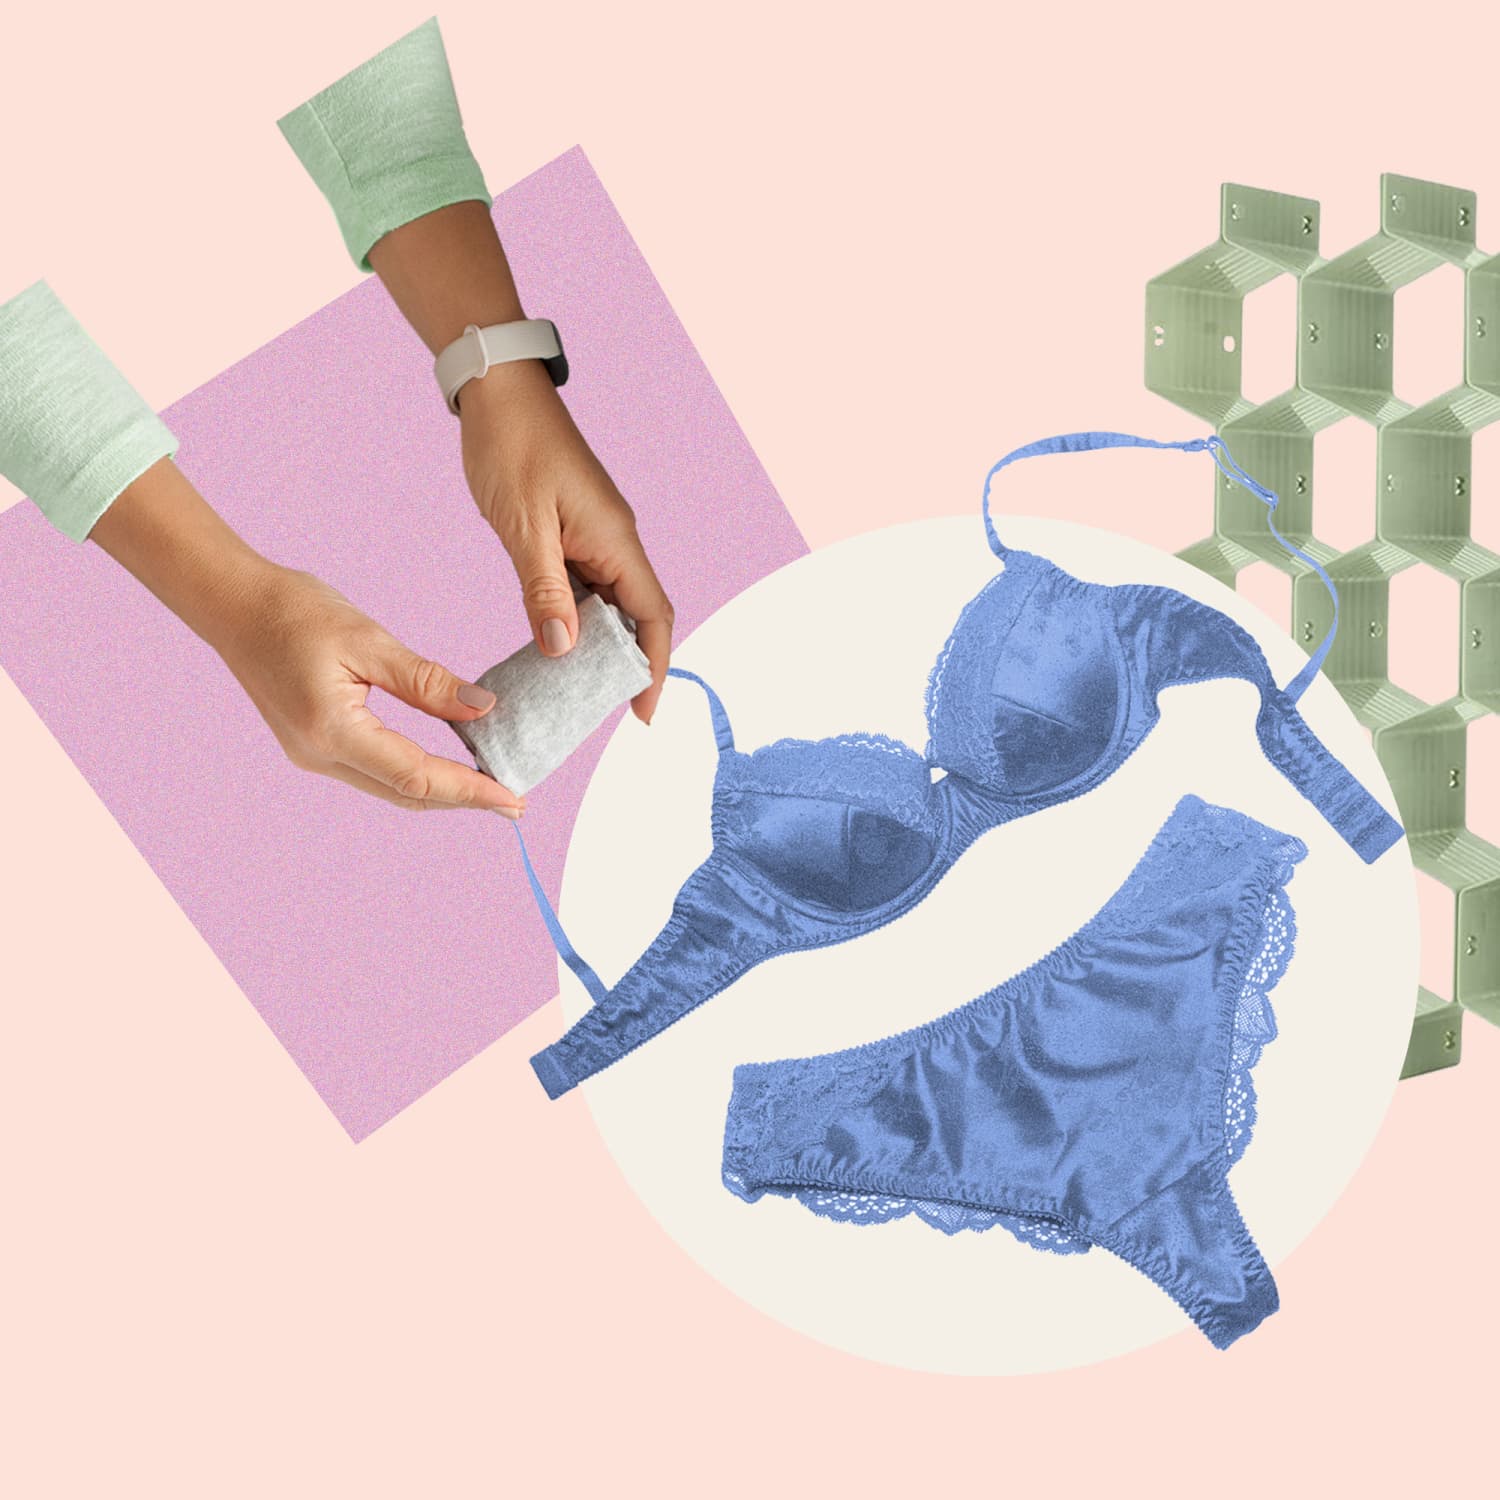 How To Launder Your Lingerie – The Laundress